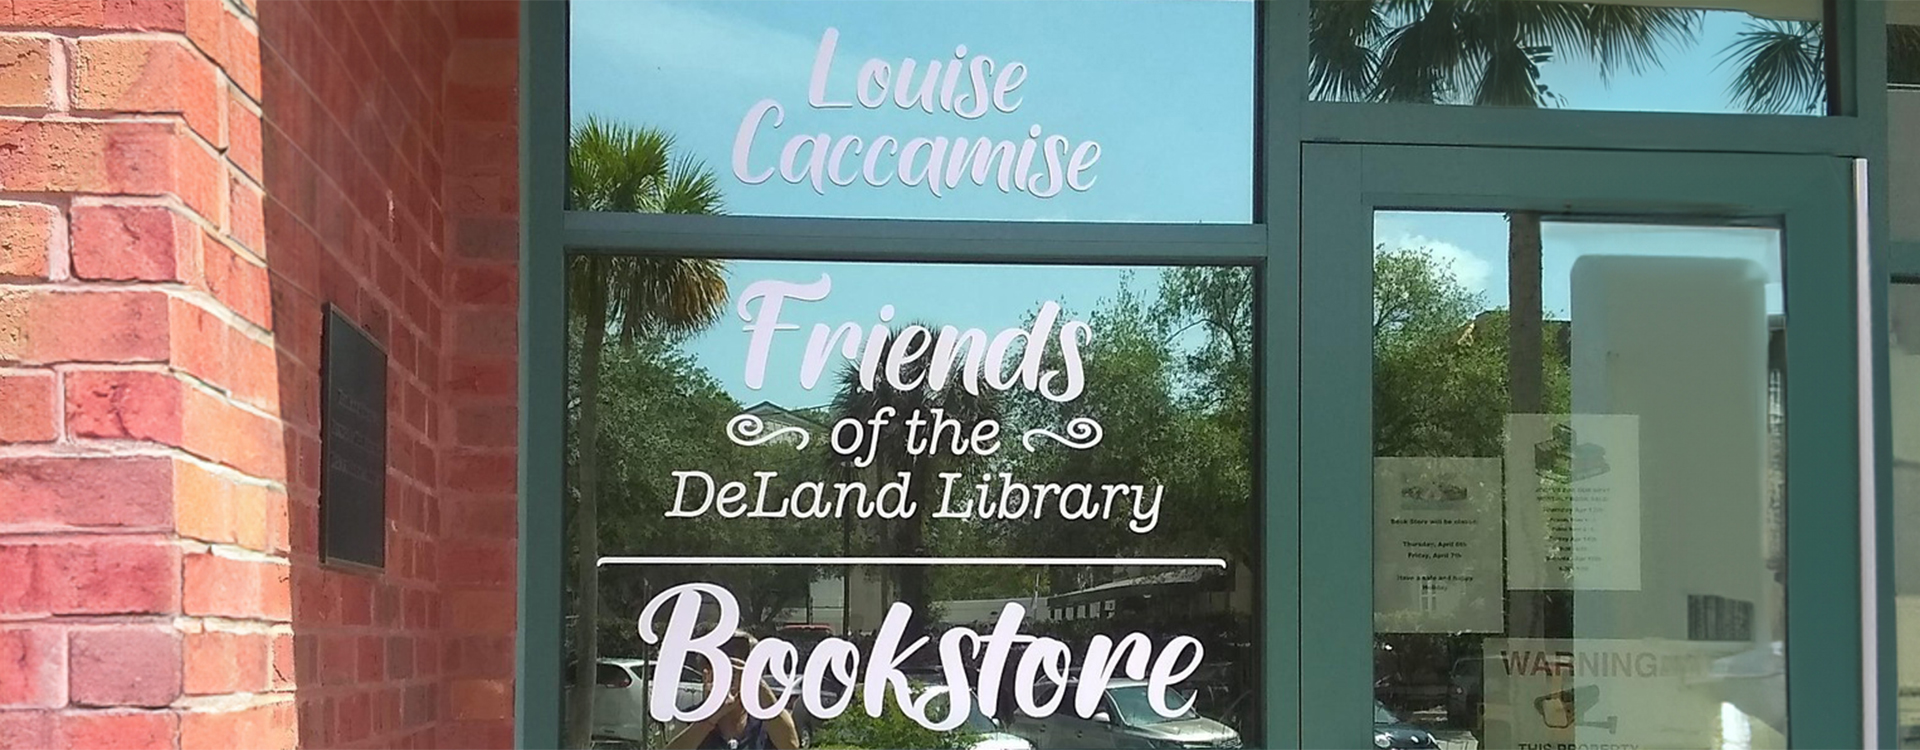 DeLand Area Public Library Friends of the Library